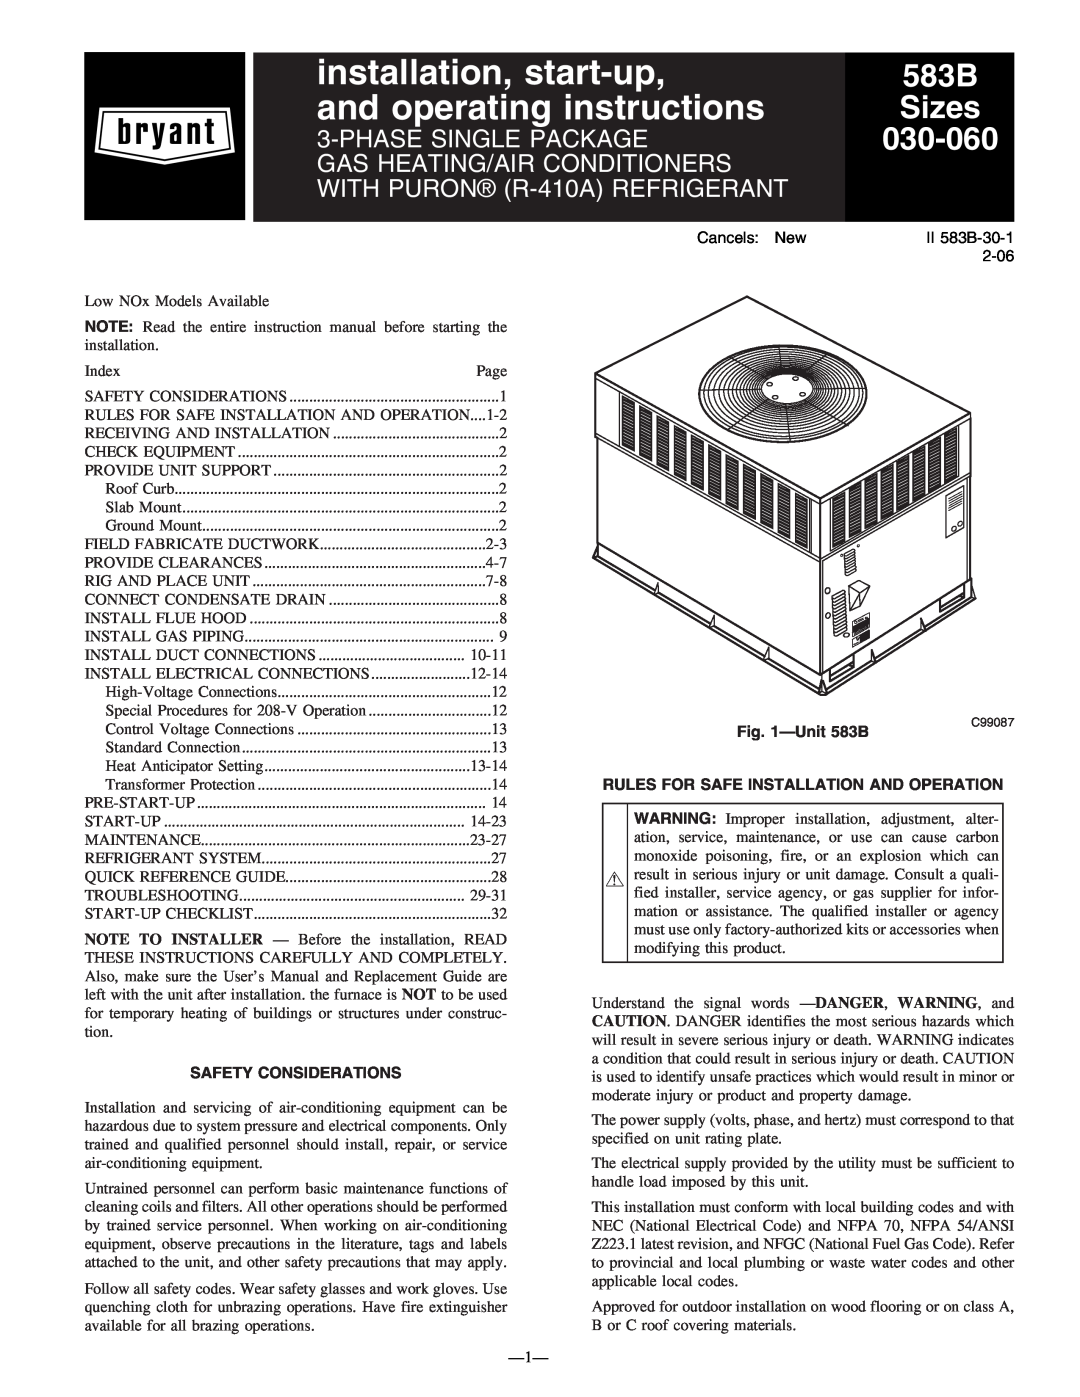 Bryant instruction manual Unit583B, Safety Considerations, Rules For Safe Installation And Operation, 583B Sizes 